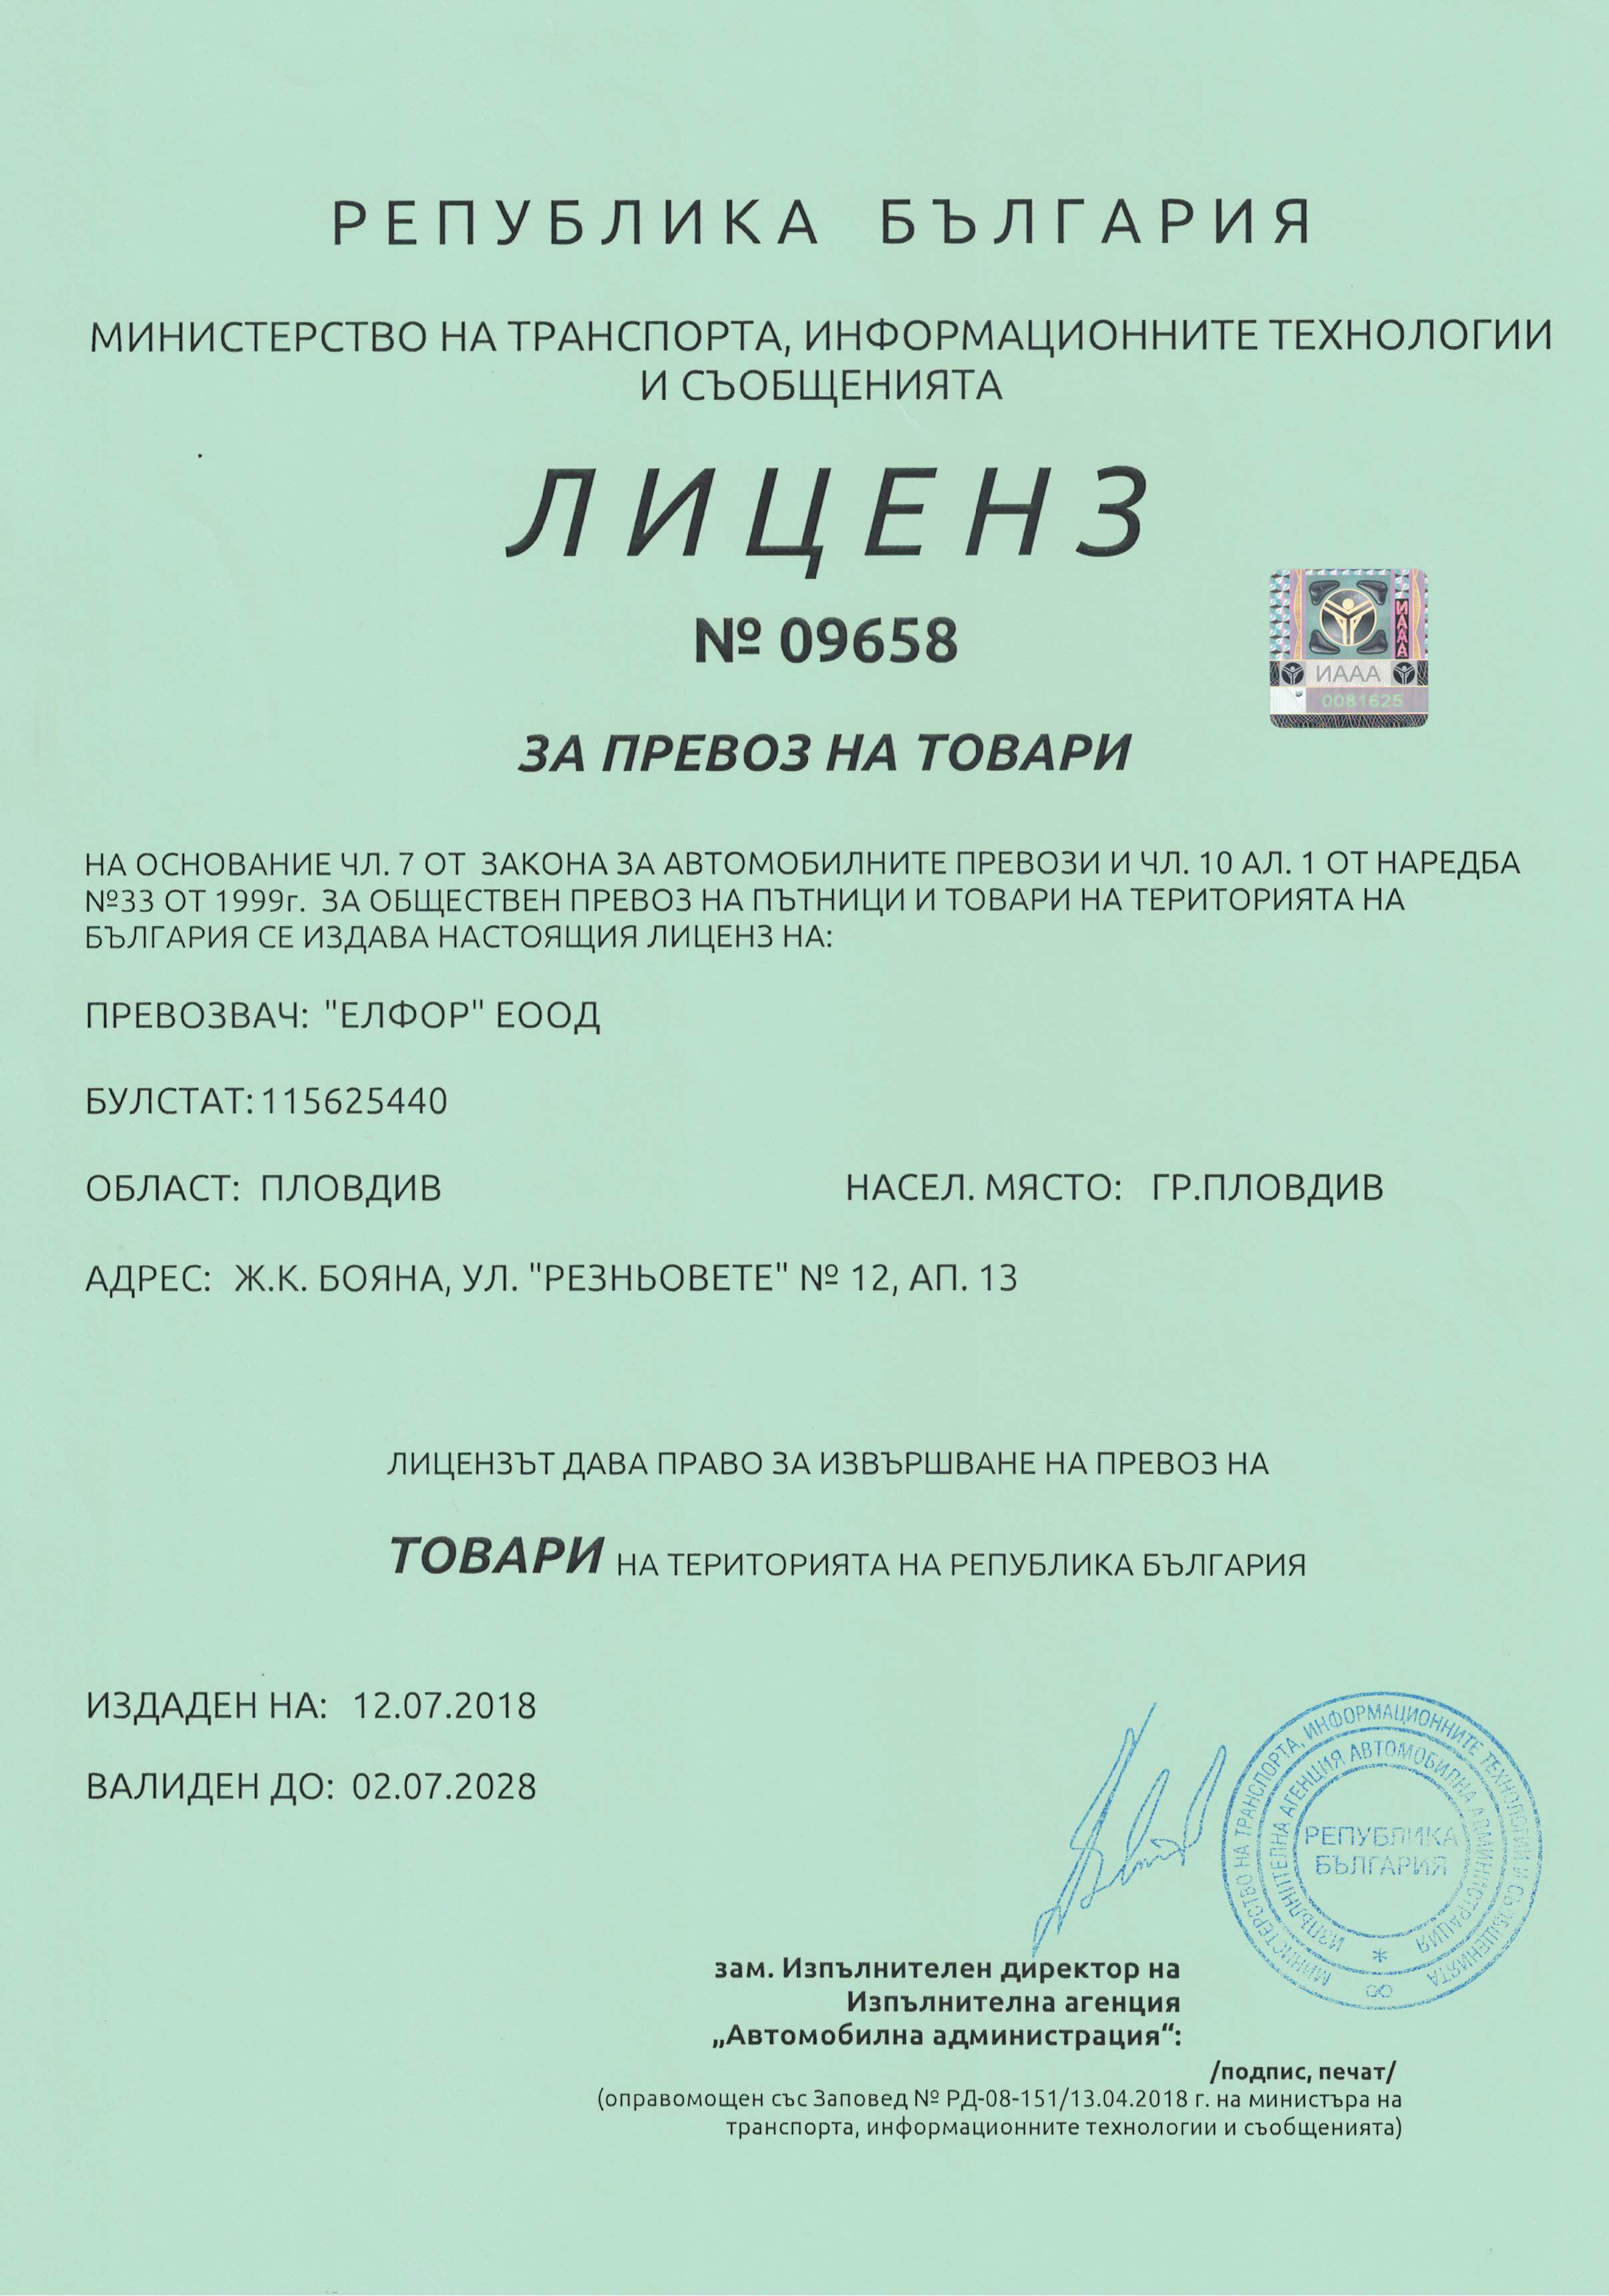 License for transportation of goods on the territory of the Republic of Bulgaria